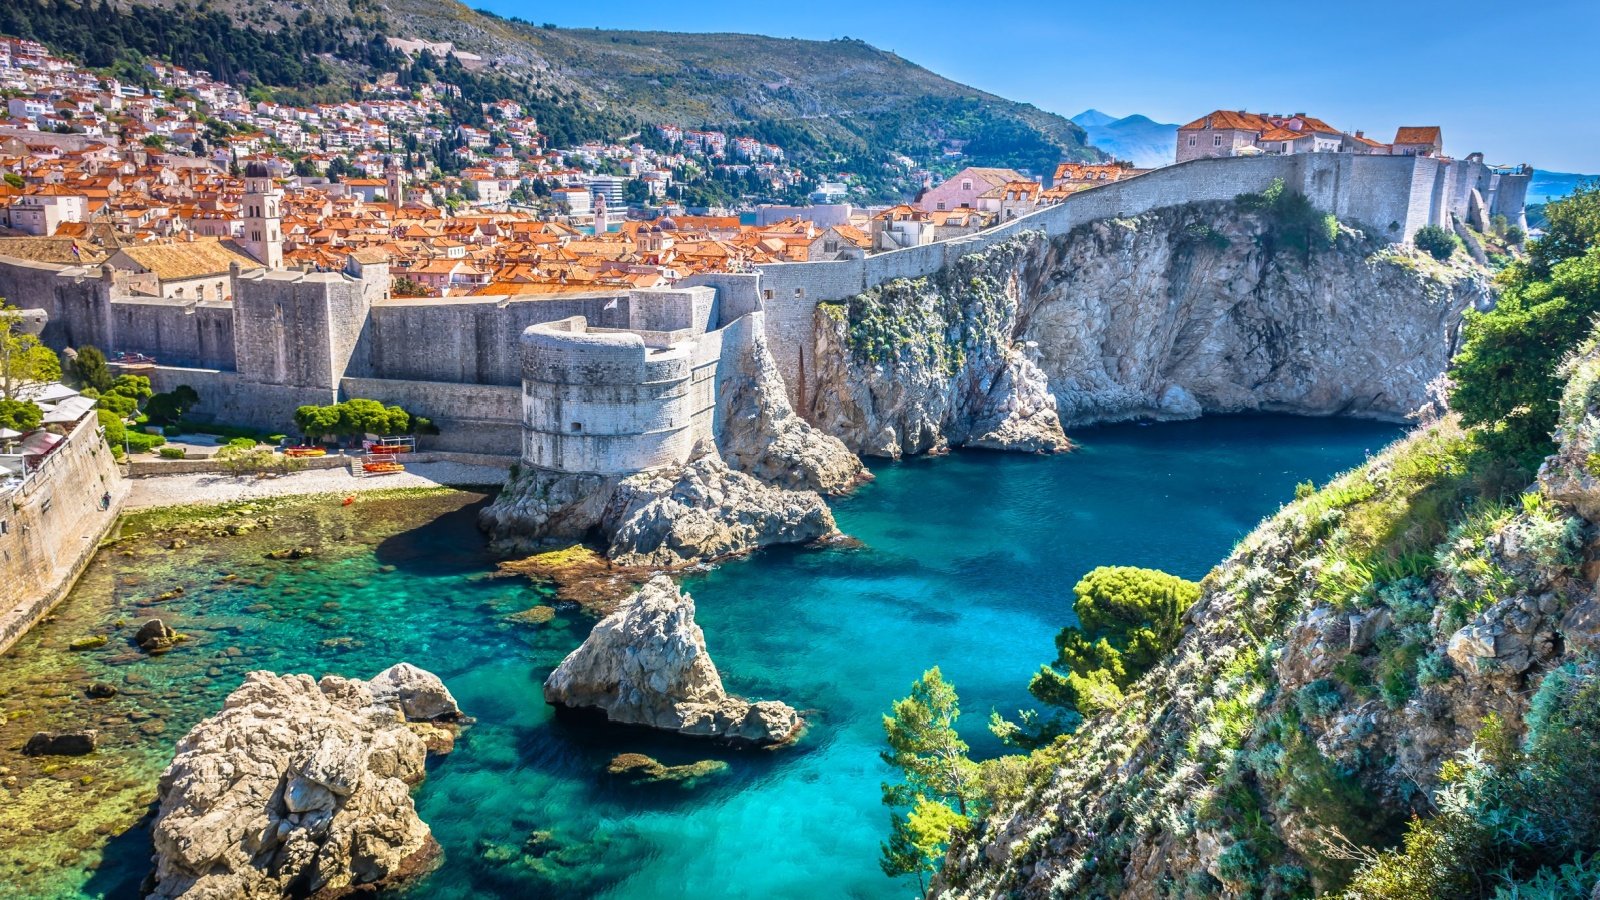 <p>Sitting on the Adriatic Sea, Dubrovnik is a walled medieval seaport city where you can wander its narrow cobblestone streets leading you through a maze of cathedrals, open-air markets, and outdoor cafes. As you explore, you’ll catch glimpses of breathtaking sea views at every turn.</p><p>Croatia offers a digital nomad visa, which is reasonably easy to obtain. Since its creation in 2021, many cities have increased amenities and businesses that cater to this new clientele. The locals are friendly and accommodating, and Croatia’s location and infrastructure make it easy to discover its neighboring countries.</p>